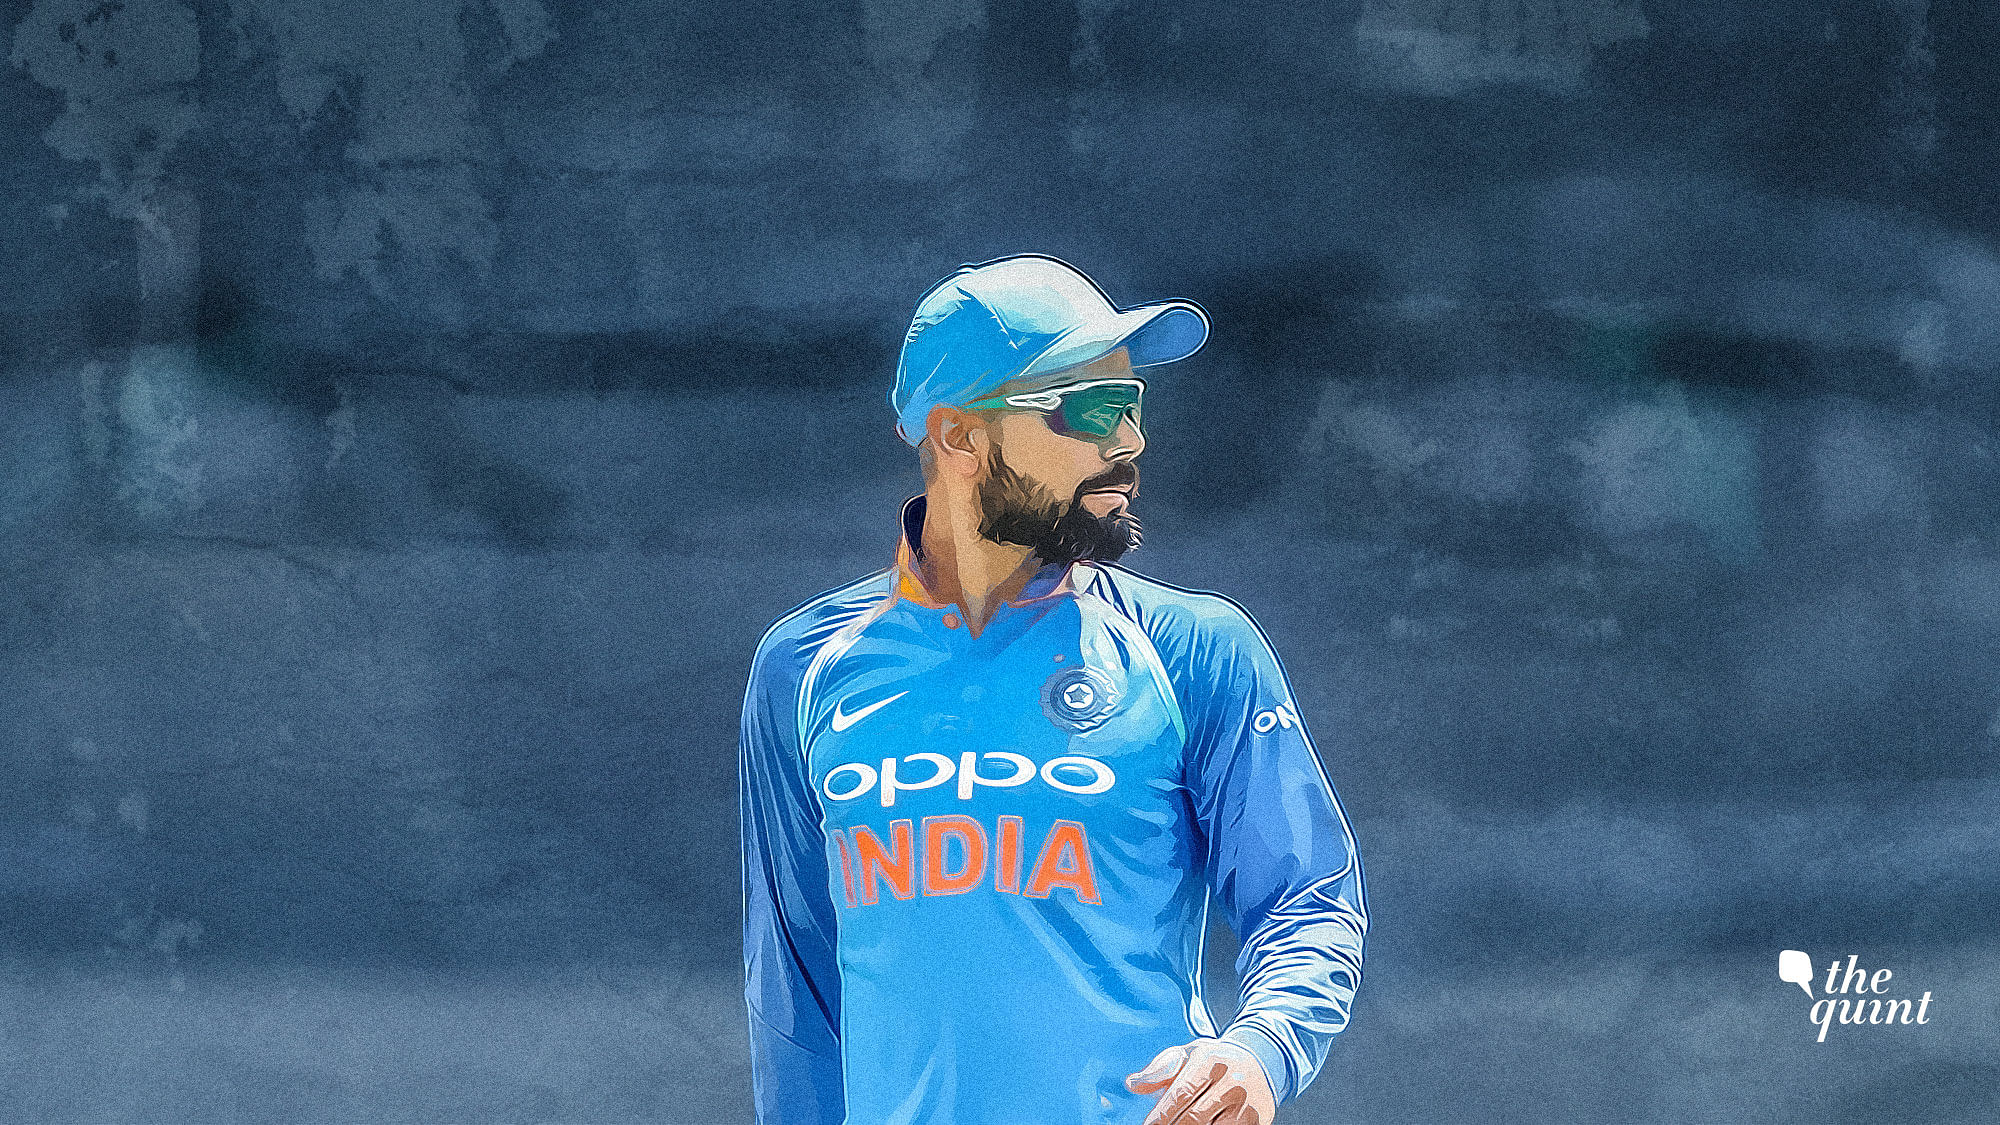 Virat Kohli is easily the most courageous captain India has ever seen.